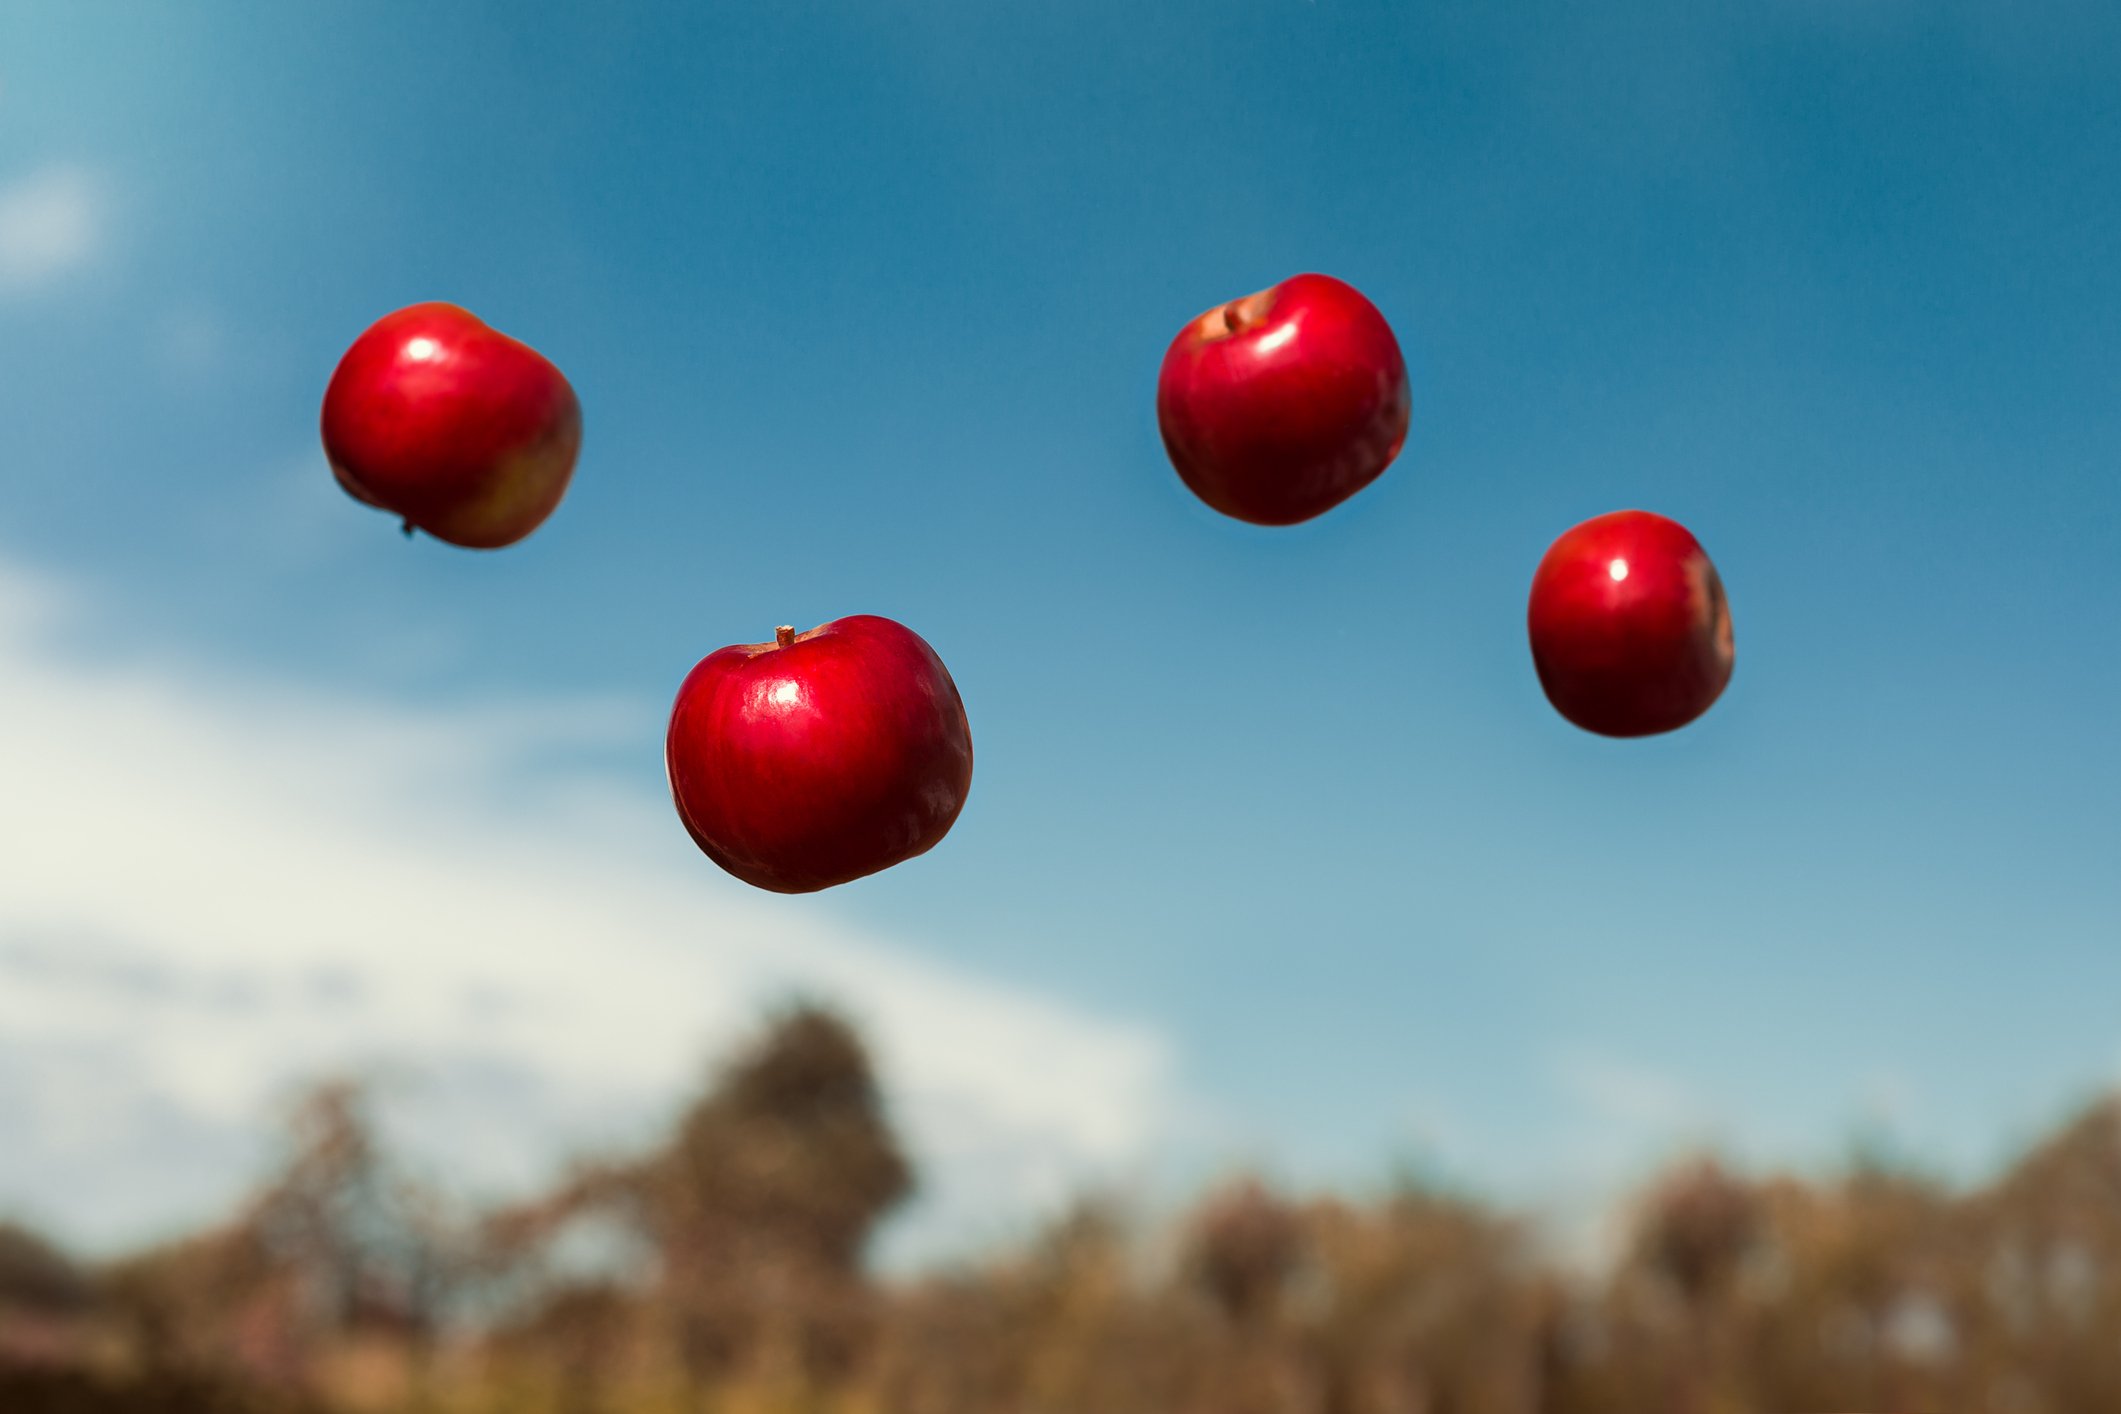 A photo of four apples suspended in the air blue sky out of focus in the background